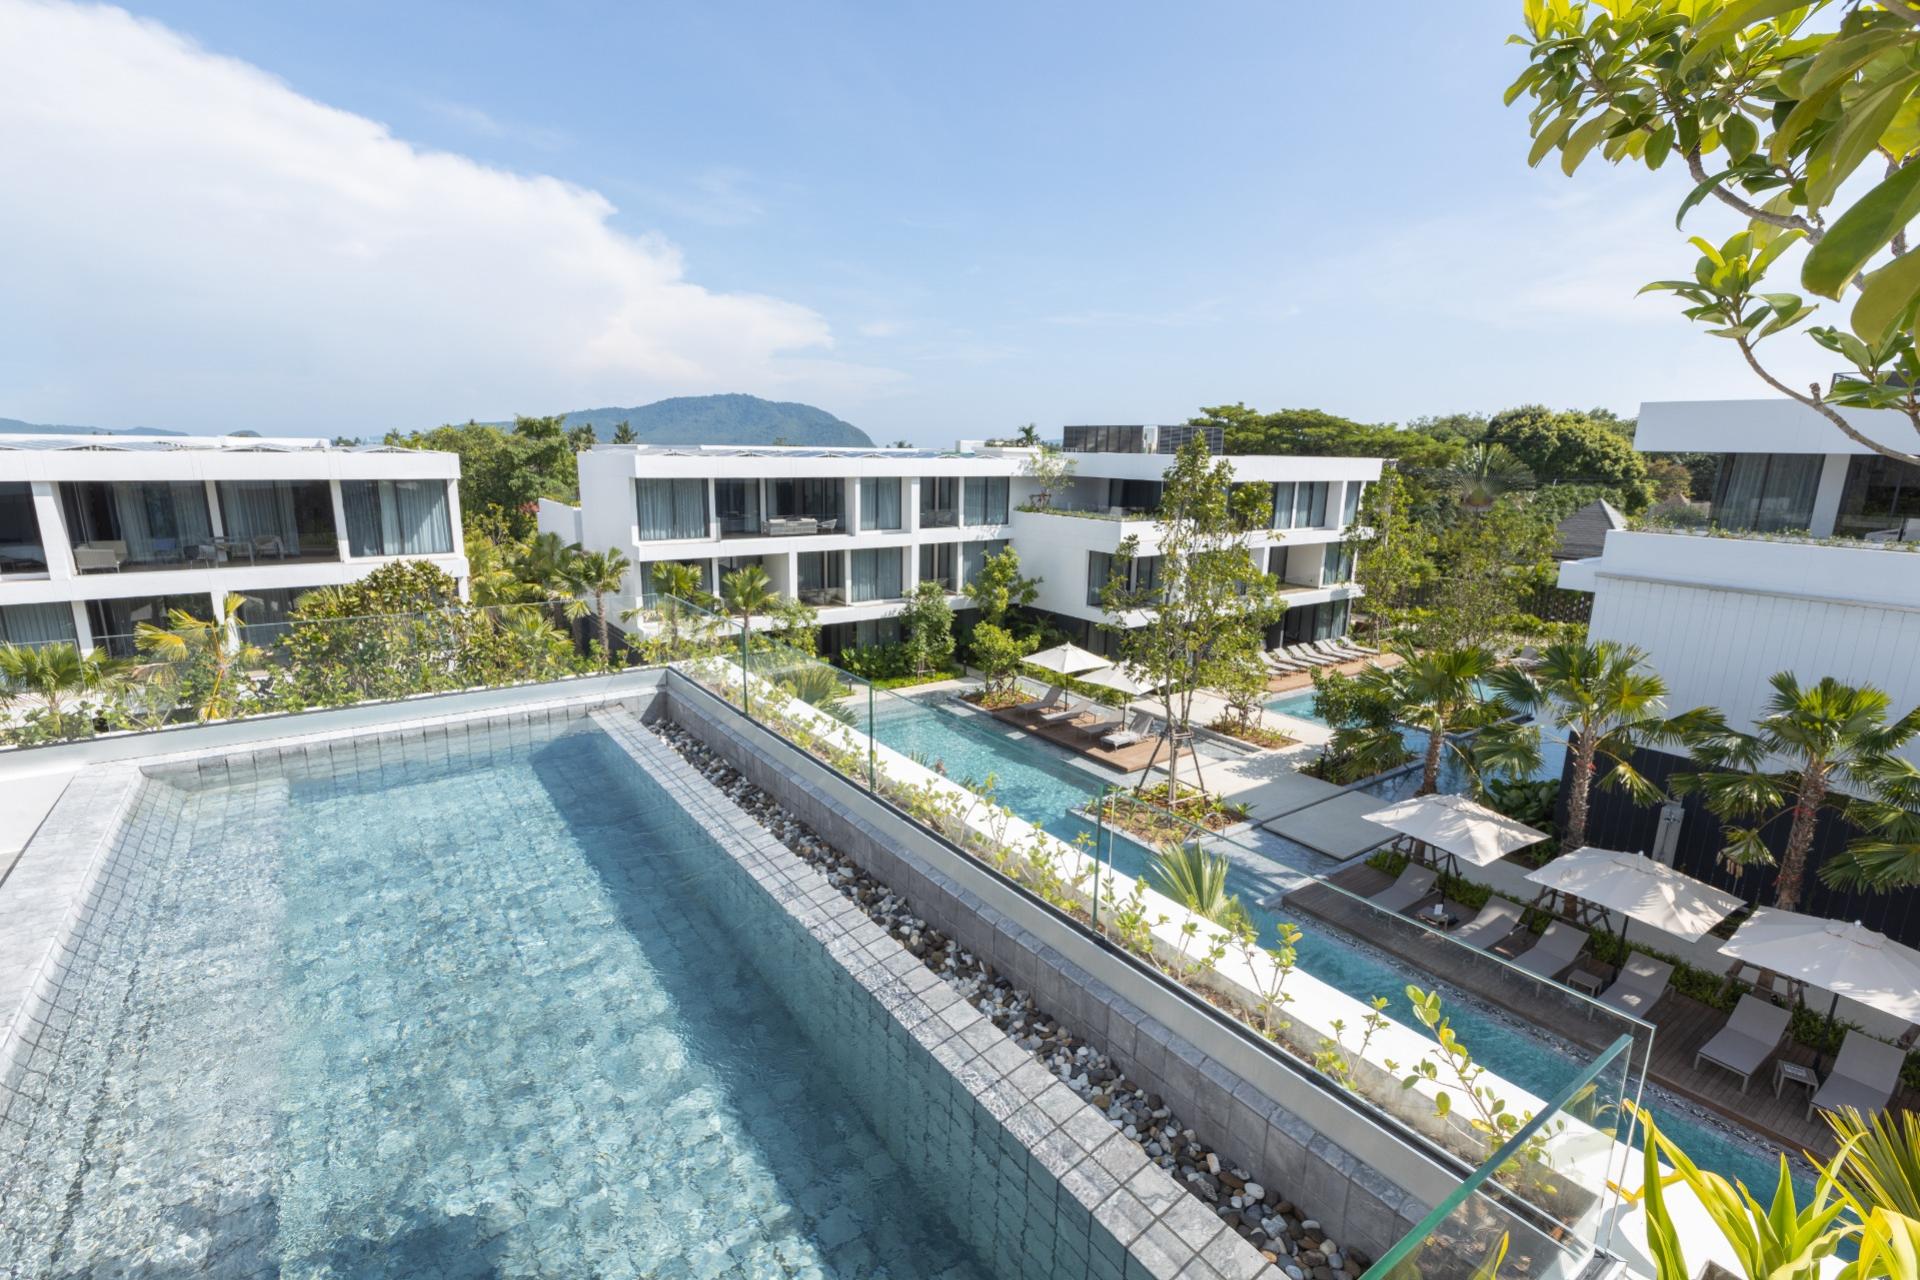 stay-wellbeing-and-lifestyle-resort-two-bedroom-suite-private-poolstay-wellbeing-_-lifestyle-resort-19-nov-201919jpg